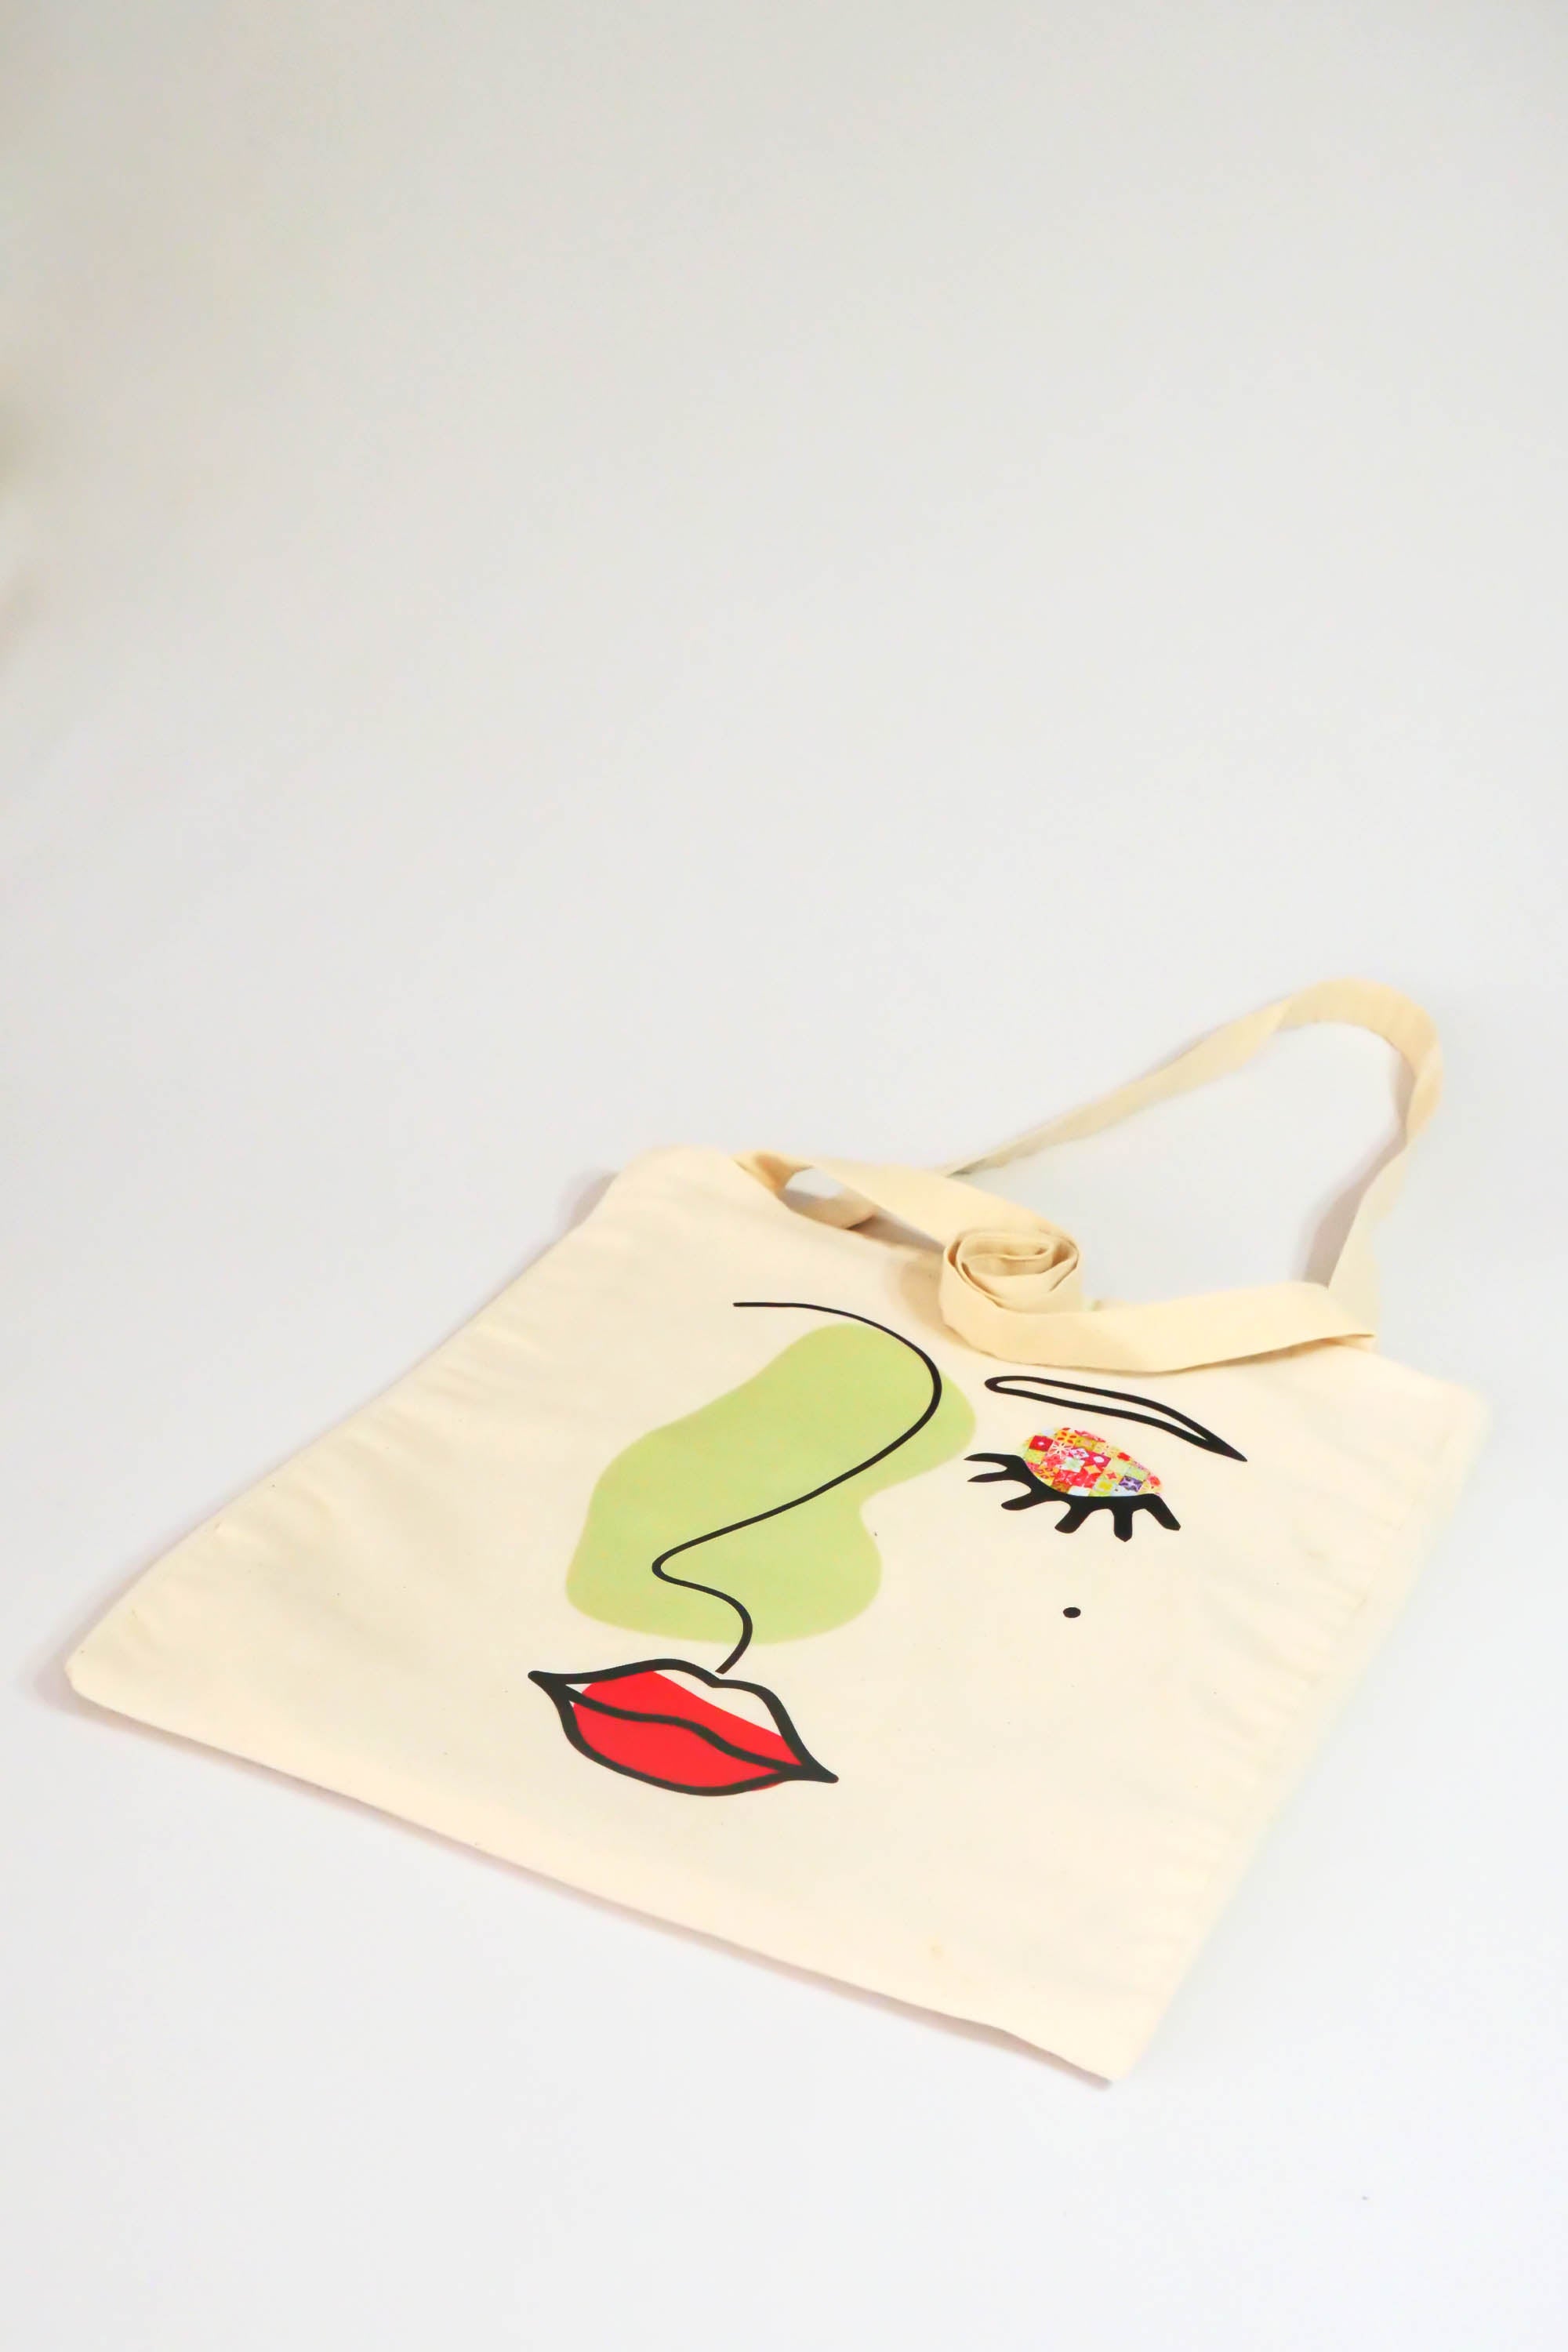 Visual Concept Abstract Face Tote Bag